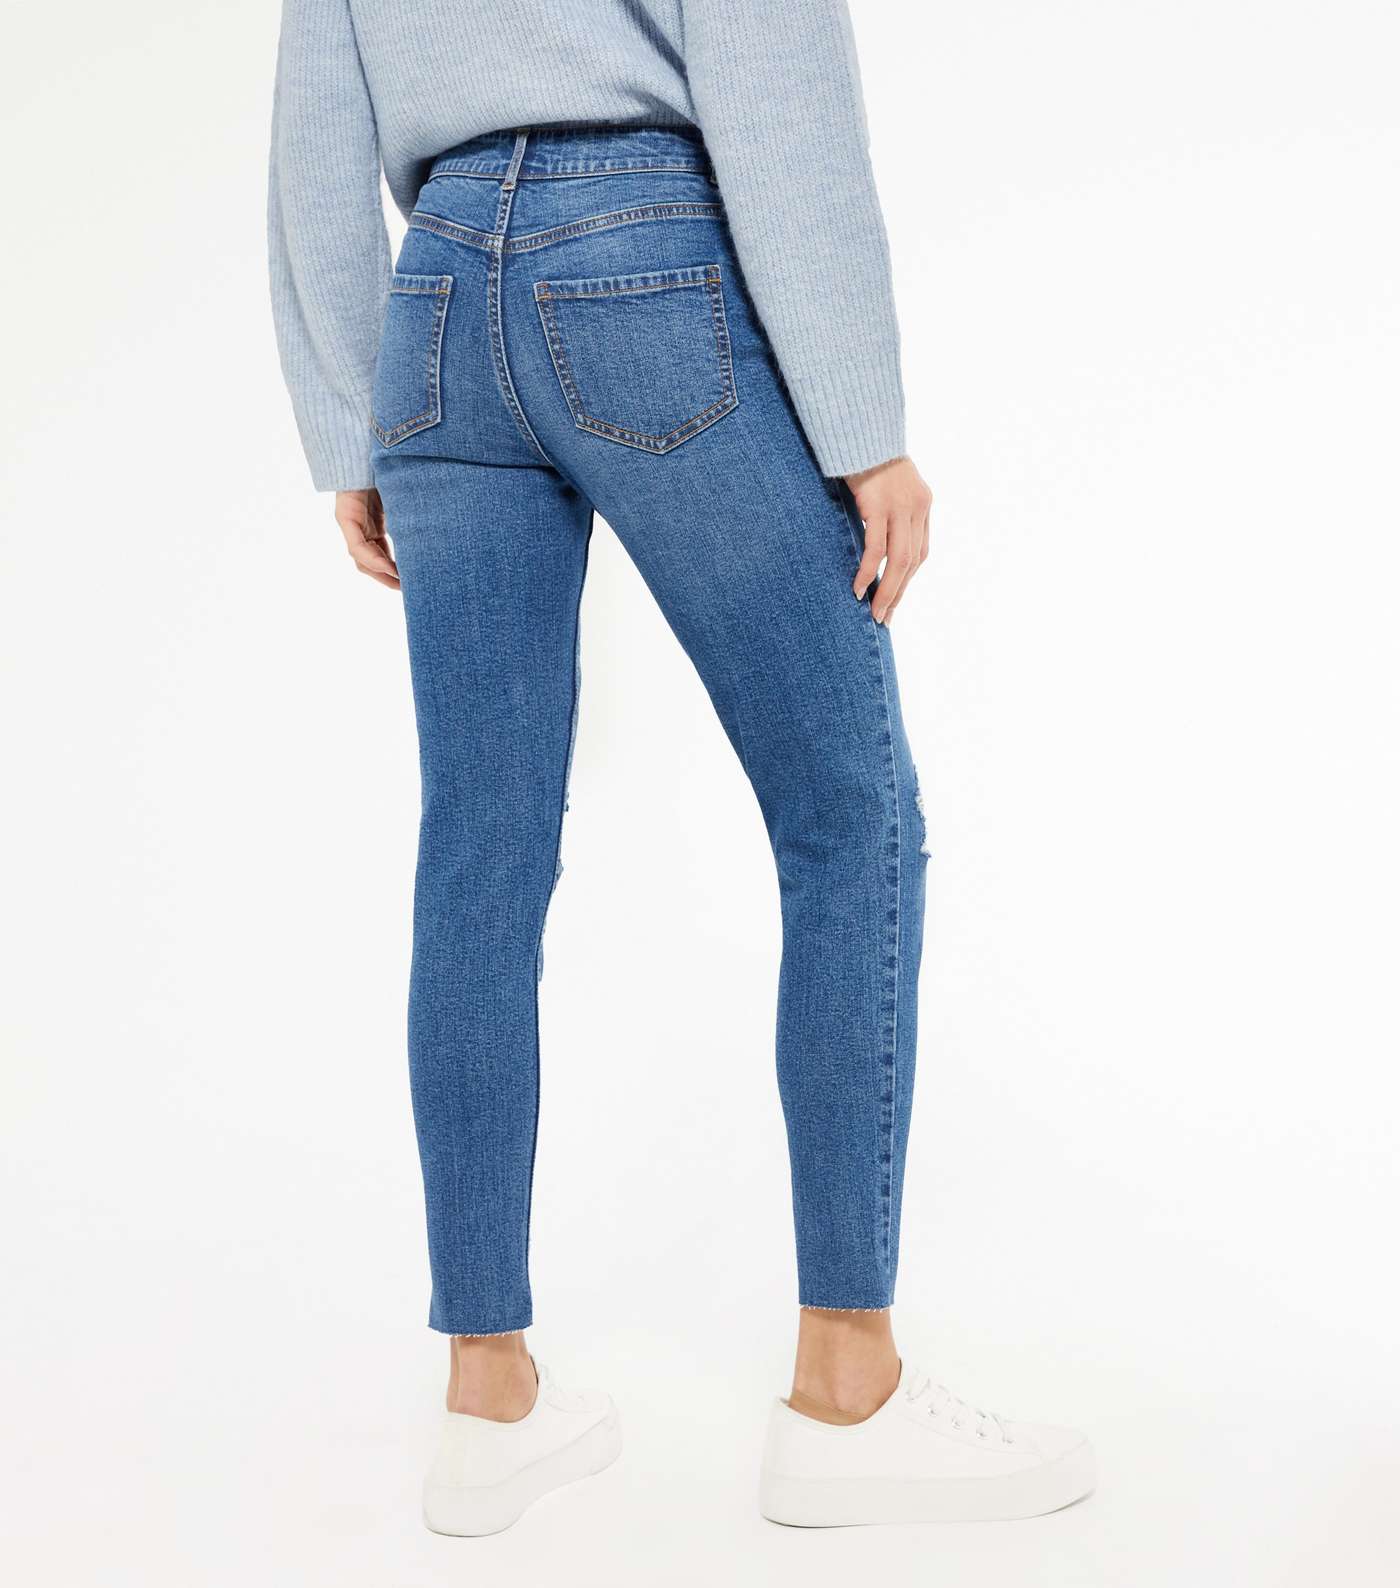 Blue Ripped Mid Rise Skinny Jeans Image 3